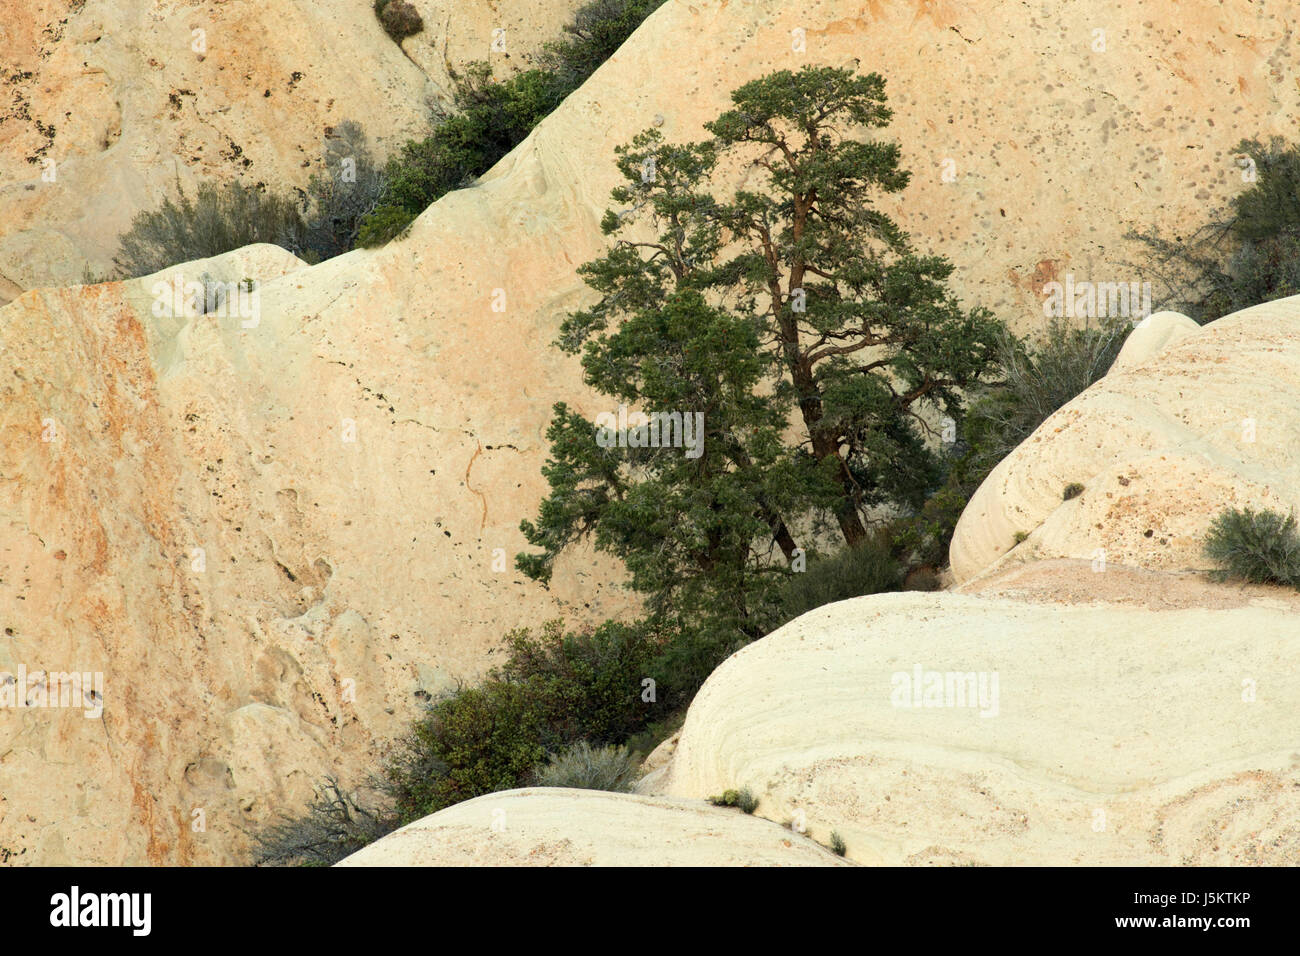 Sandstone outcrop with pinyon pine, Devils Punchbowl County Park, California Stock Photo